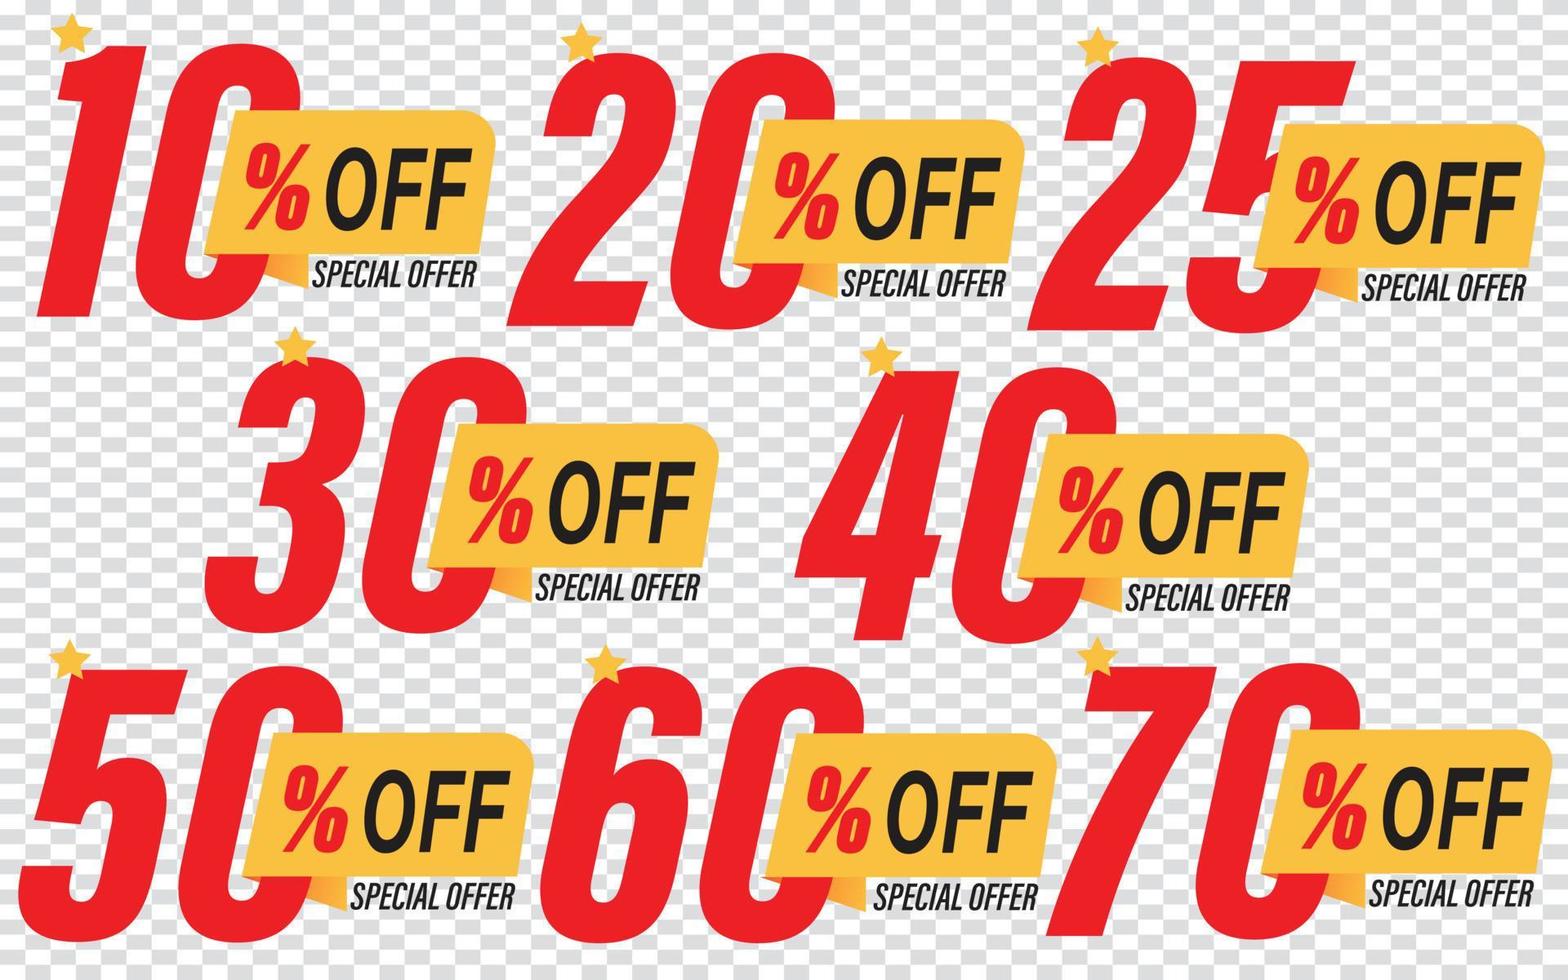 Special offer discount label with different sale percentage. 10, 20, 30, 70, 50 percent off price reduction badge vector